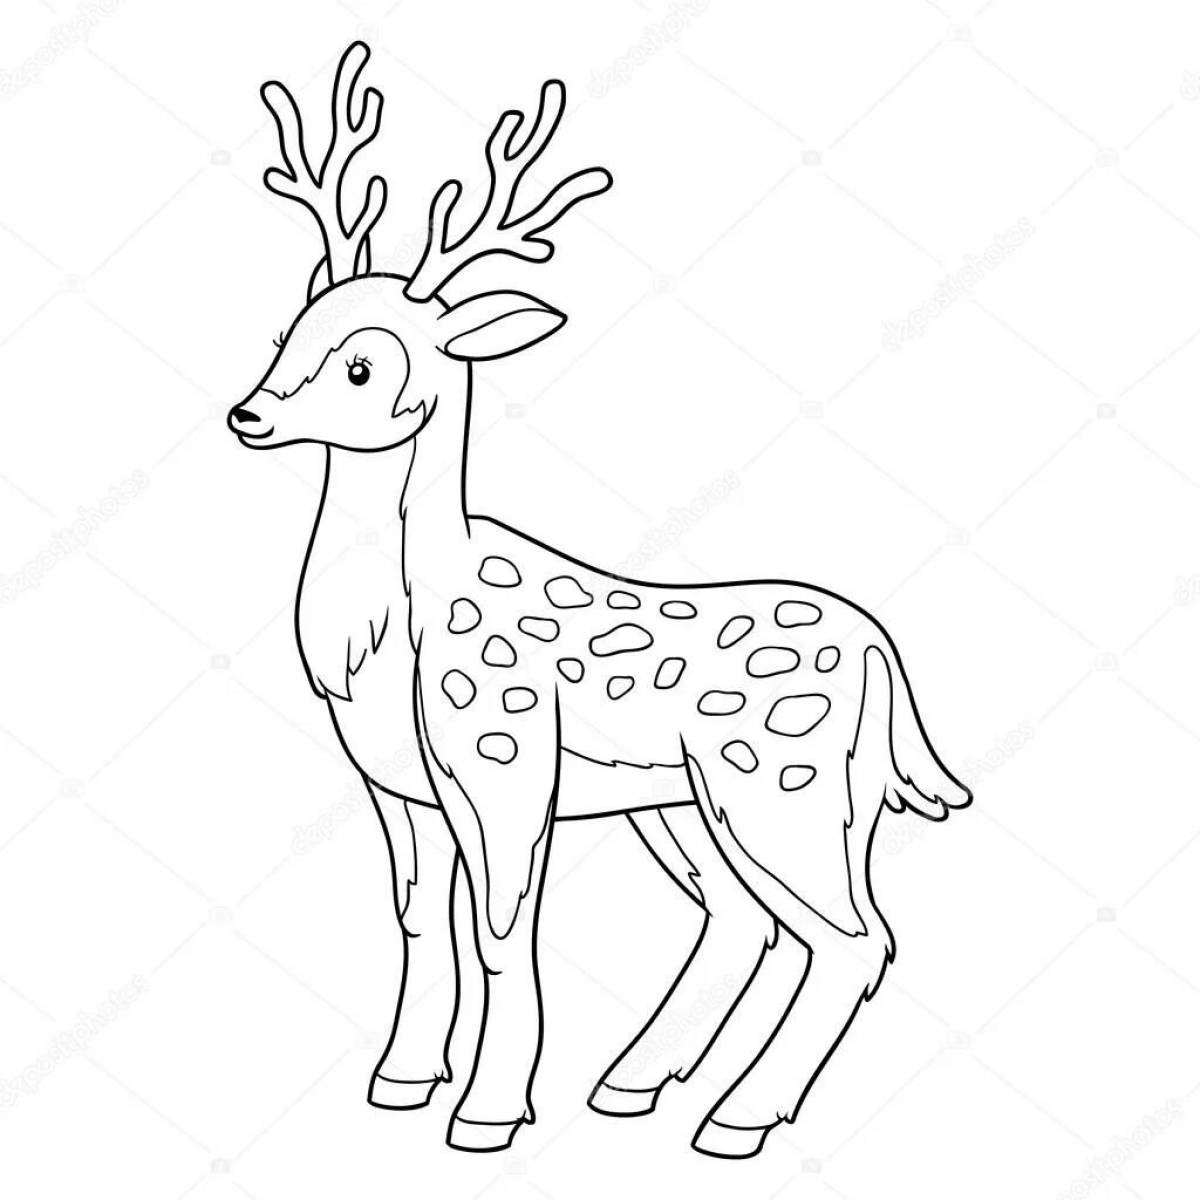 Color-vibrant oleshek coloring page